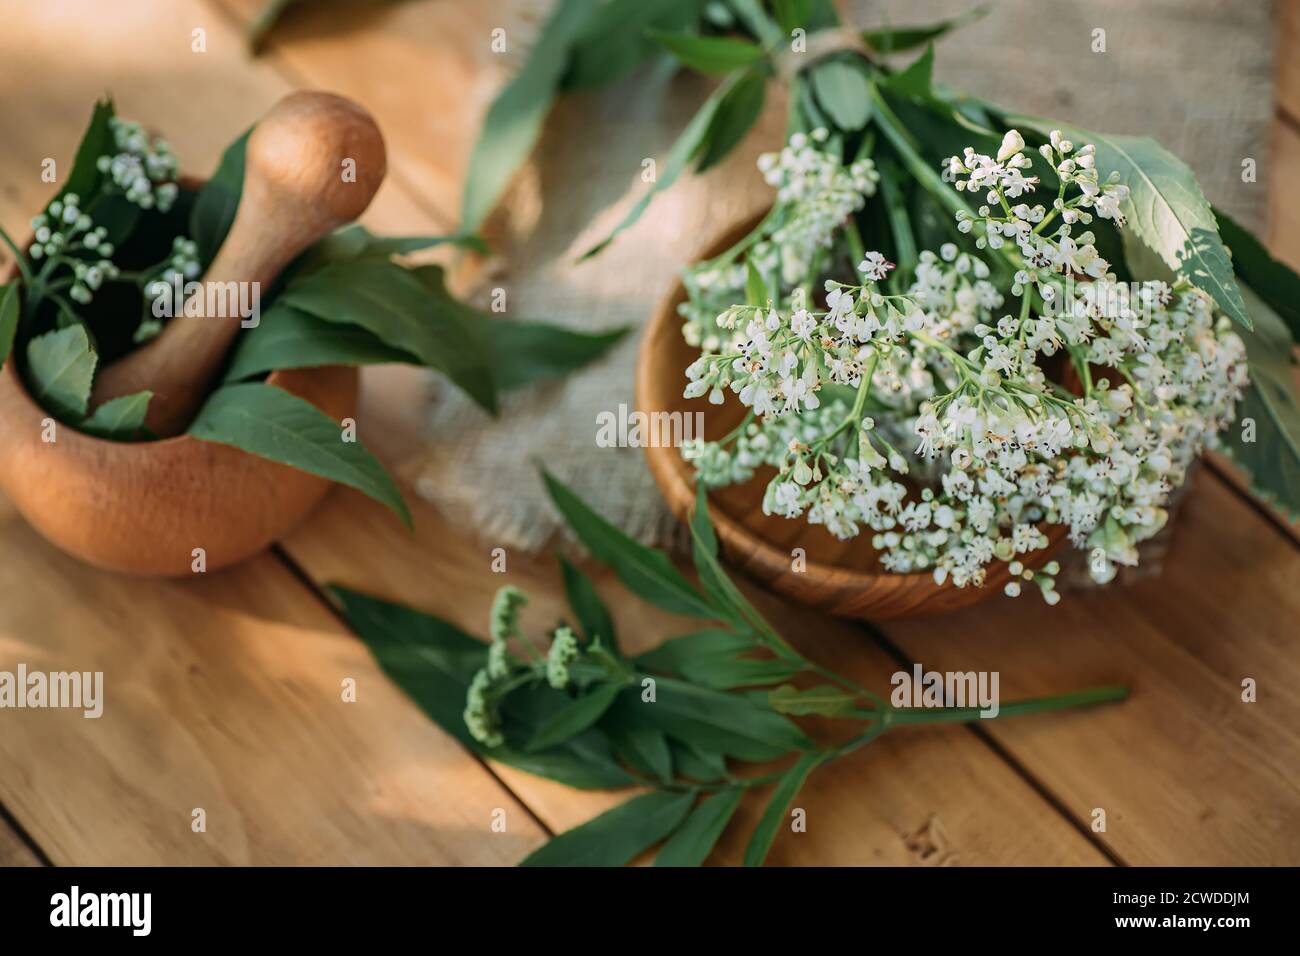 Fresh valerian flowers in wooden plate on table. mortar with prepared potion of valerian root. use of medicinal plants in traditional medicine. Top vi Stock Photo